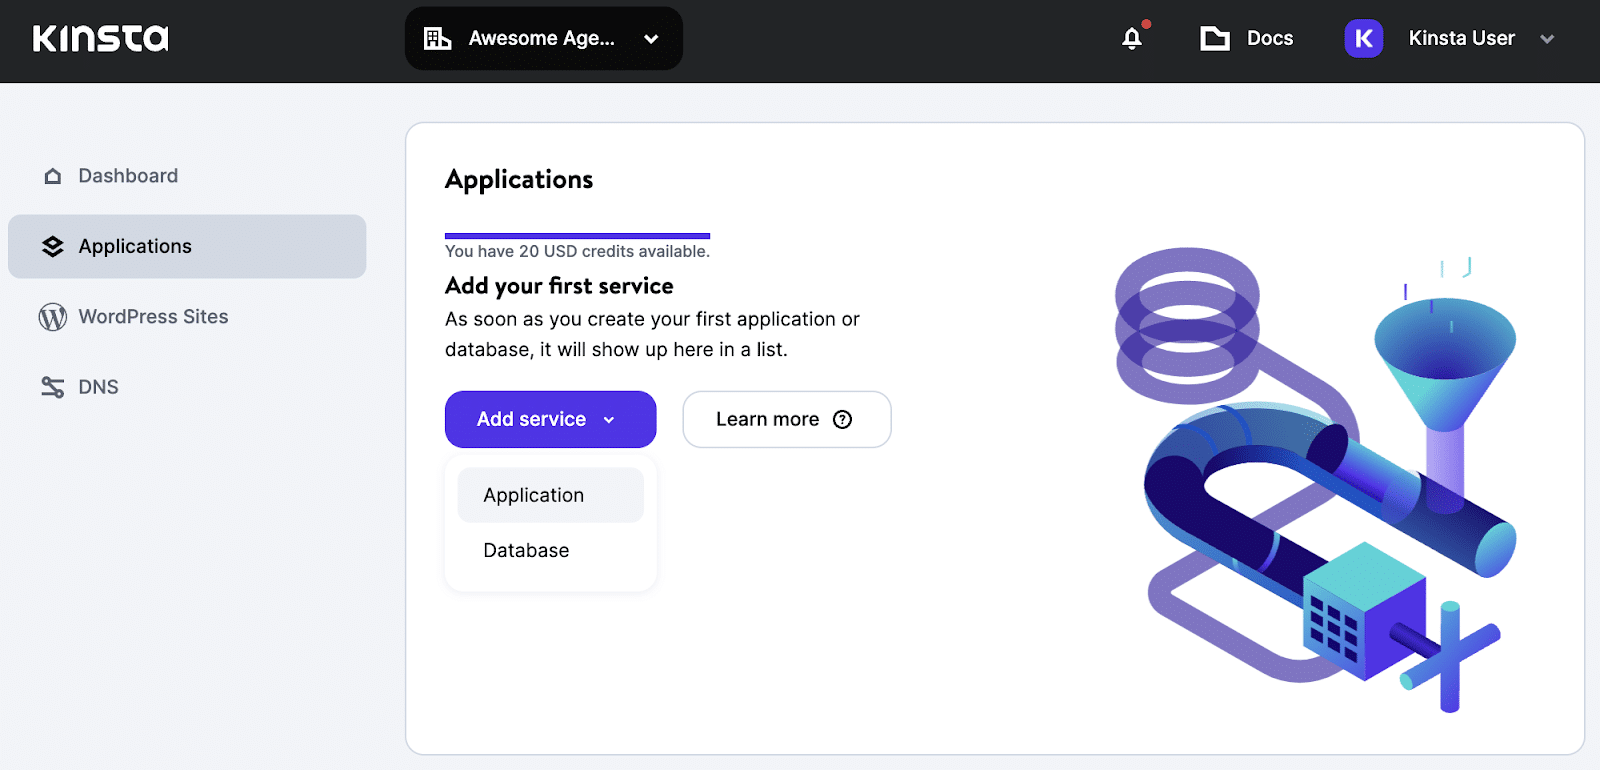 he MyKinsta dashboard opened to the "Applications" section, which shows a purple "Add service" dropdown with two options: "Application" and "Database".